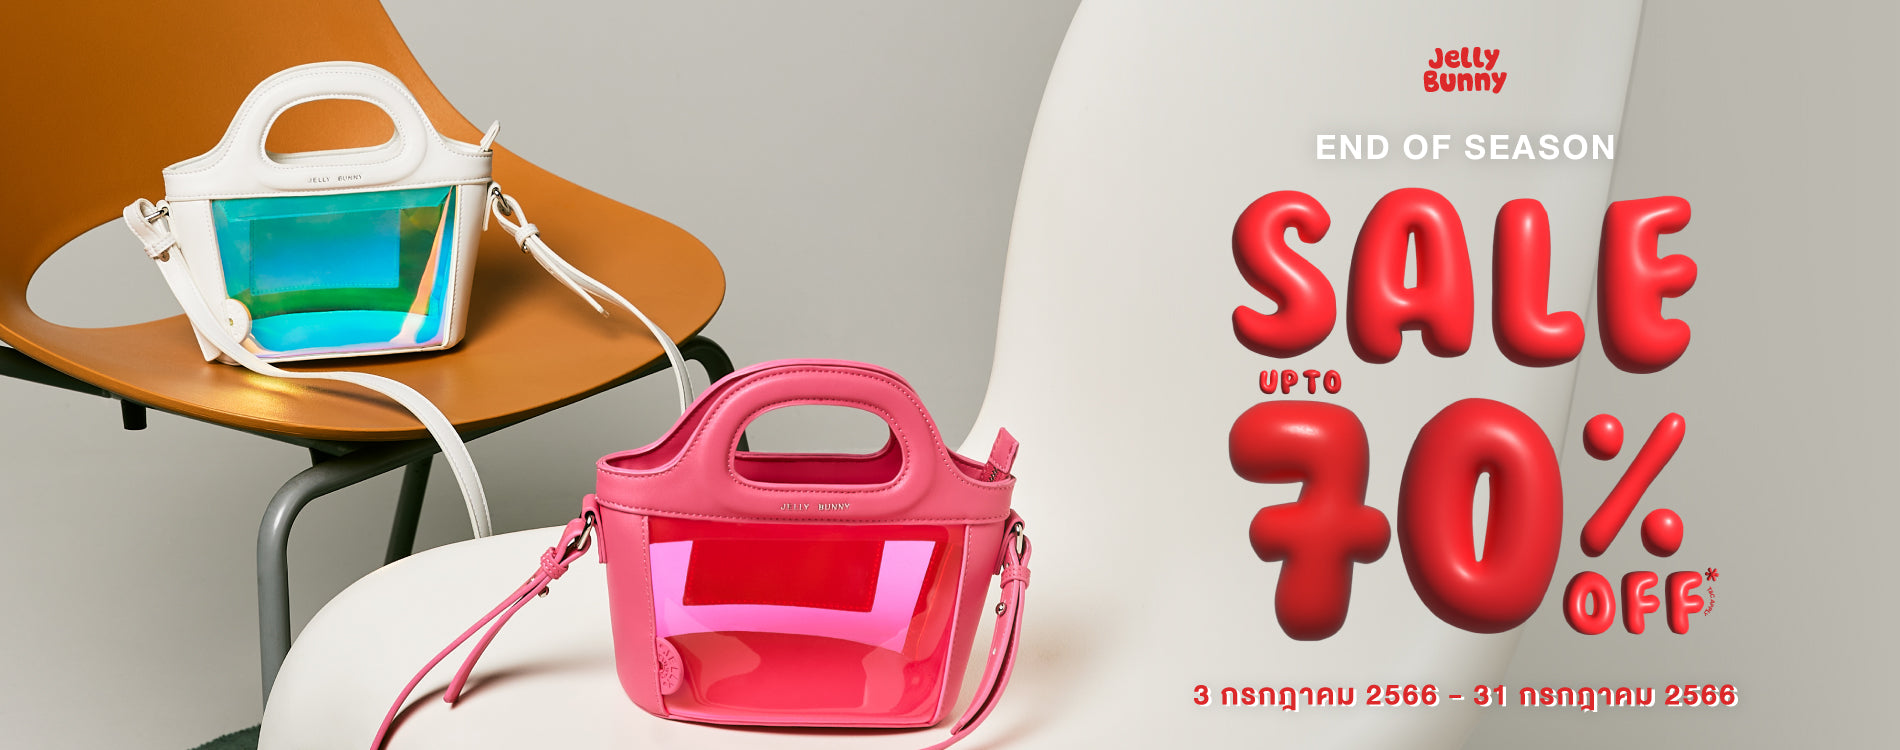 End Of Season Sale 23 | Jelly Bunny Th